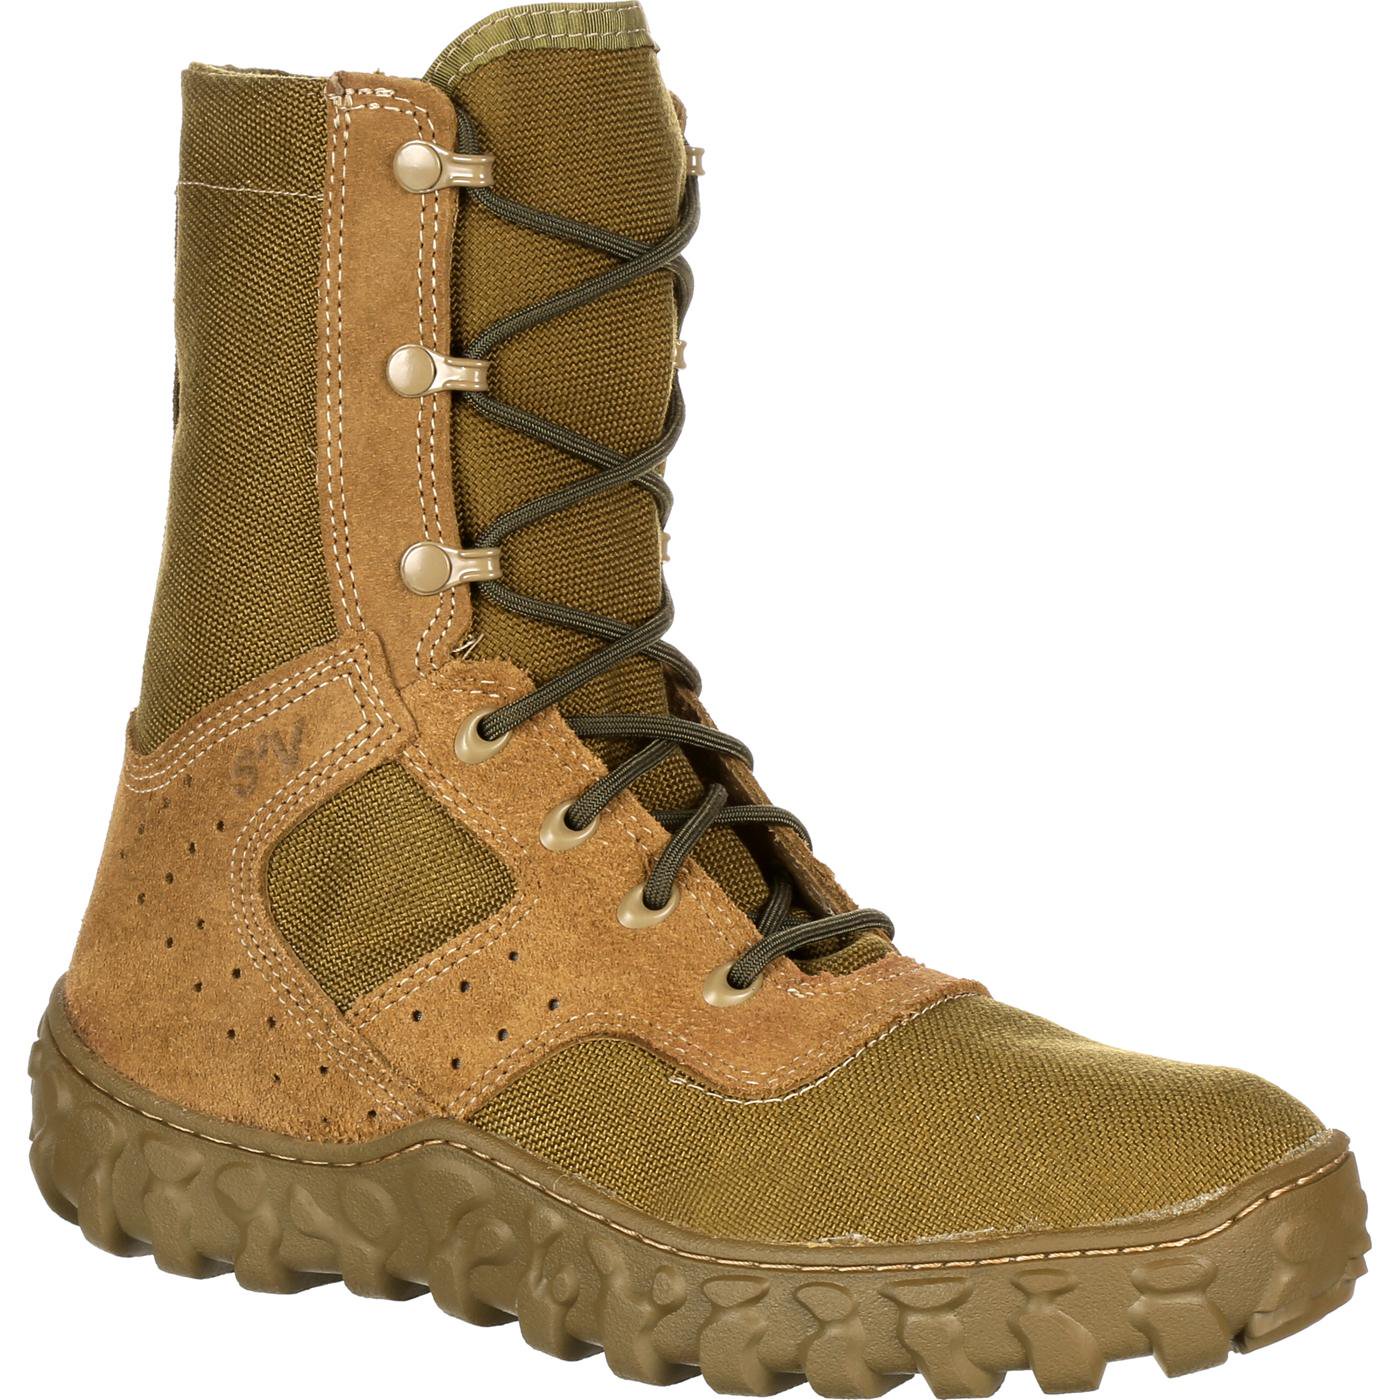 Rocky S2V Men's Military Jungle Boots, style #FQ0000106